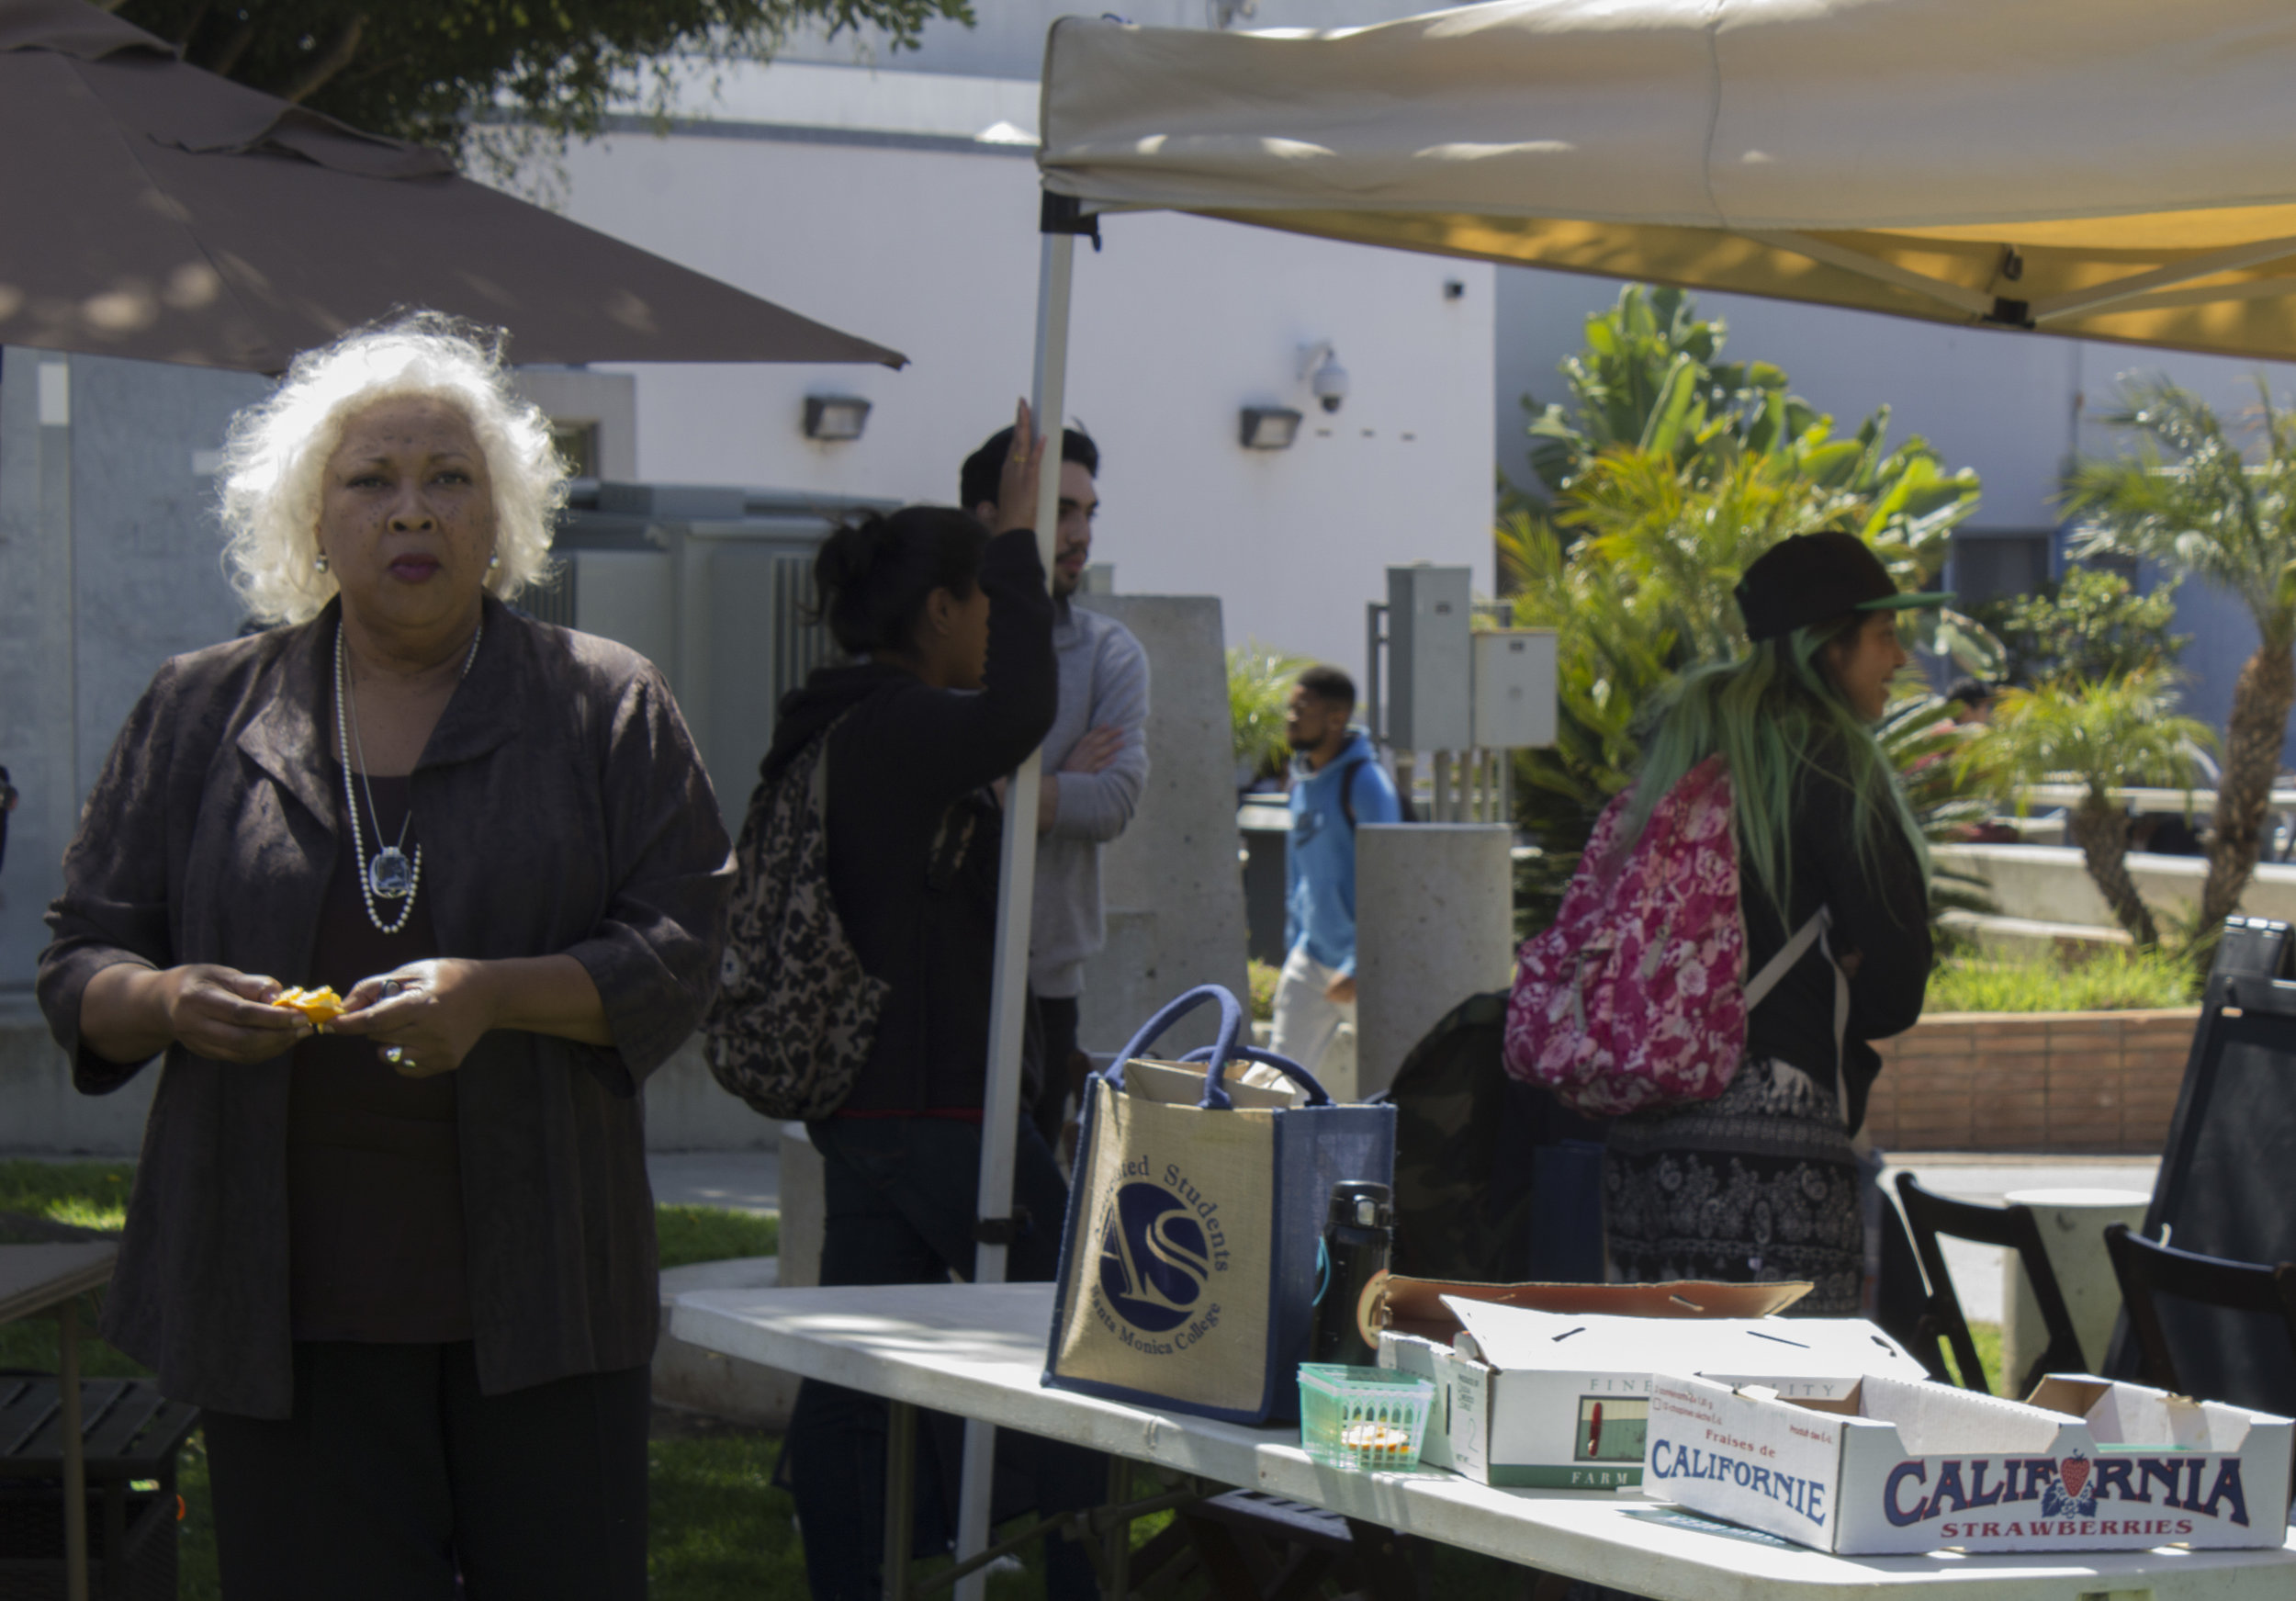  Dr. Kathryn Jeffery (left), President of Santa Monica College, attended the morning Farmers Market. Earth Week started with 'Students Feeding Students' Free Farmers Market & Food Demos on Monday, April 16, 2018. At Santa Monica College, Santa Monica